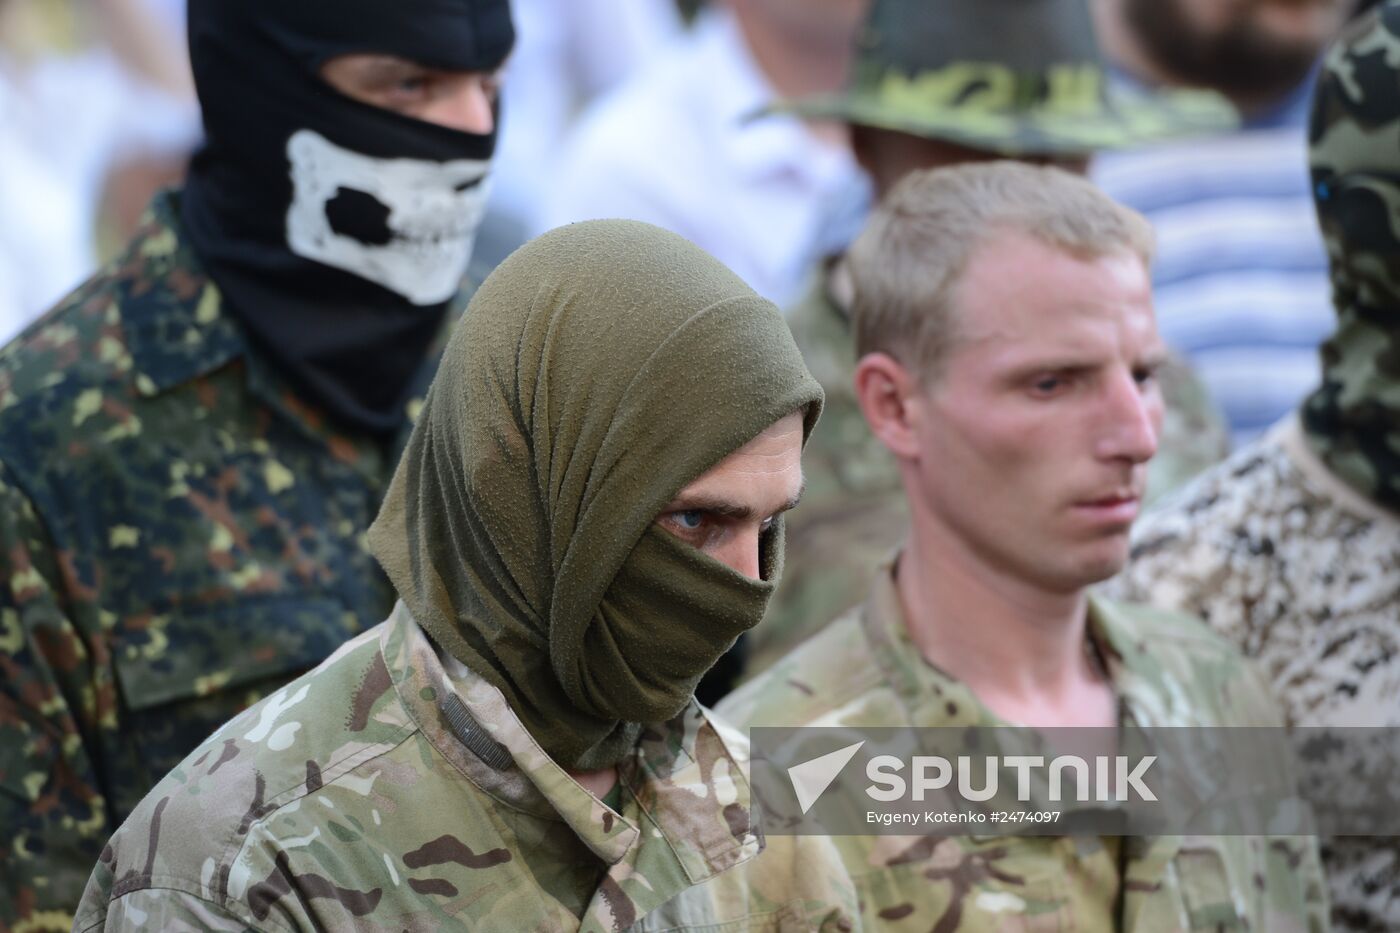 Ceremony to see off soldiers of National Guard battalion "Shakhtyorsk" leaving for military operation zone